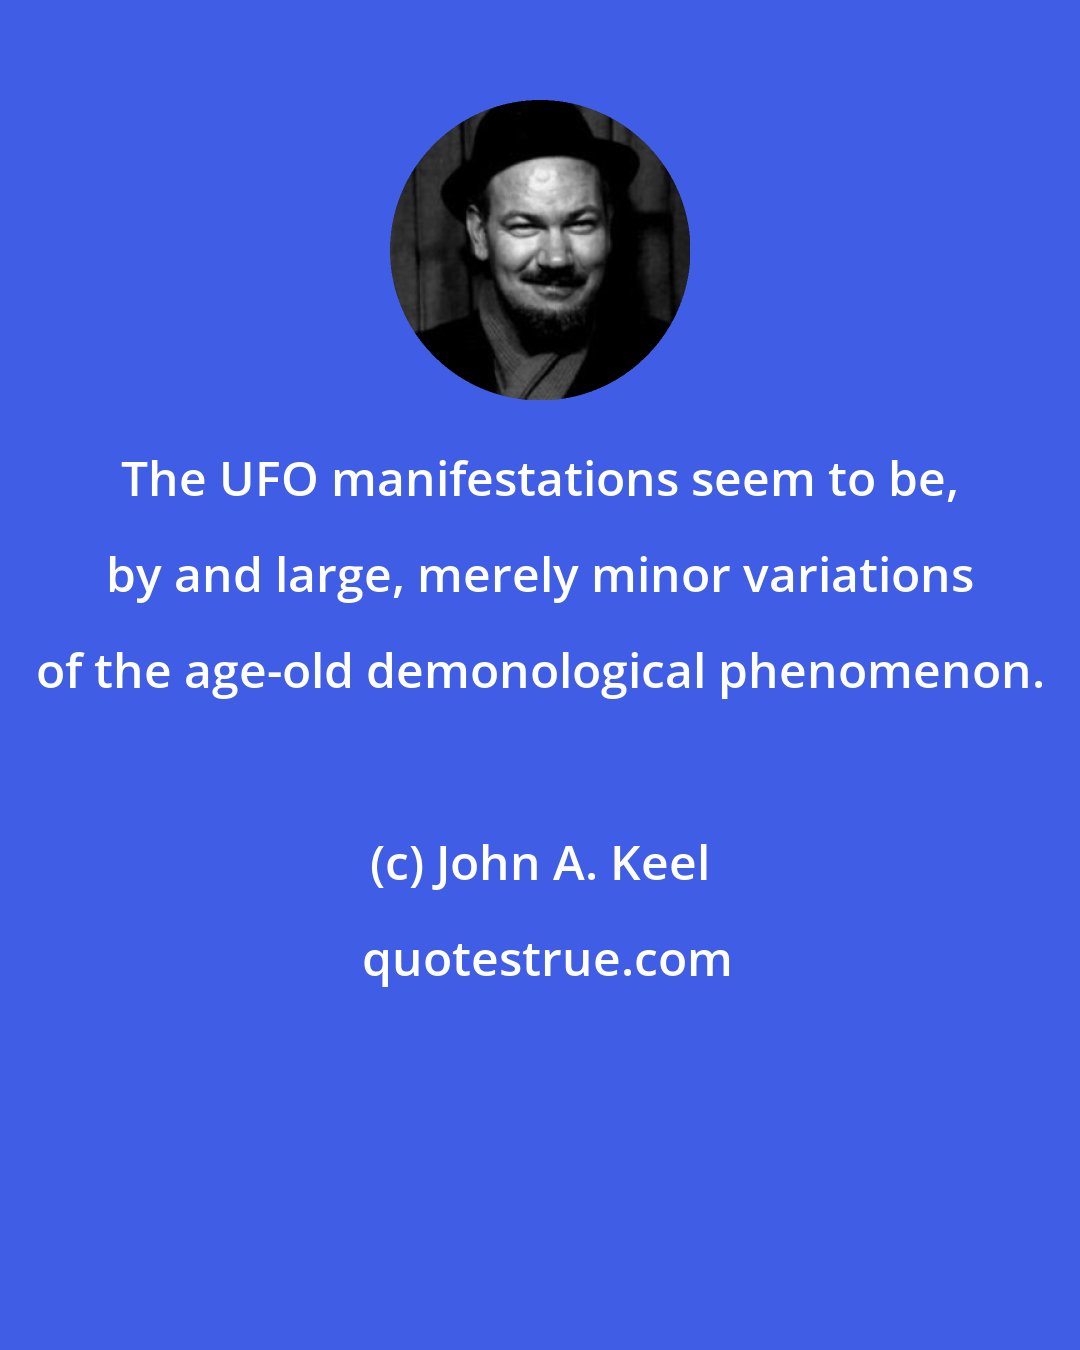 John A. Keel: The UFO manifestations seem to be, by and large, merely minor variations of the age-old demonological phenomenon.